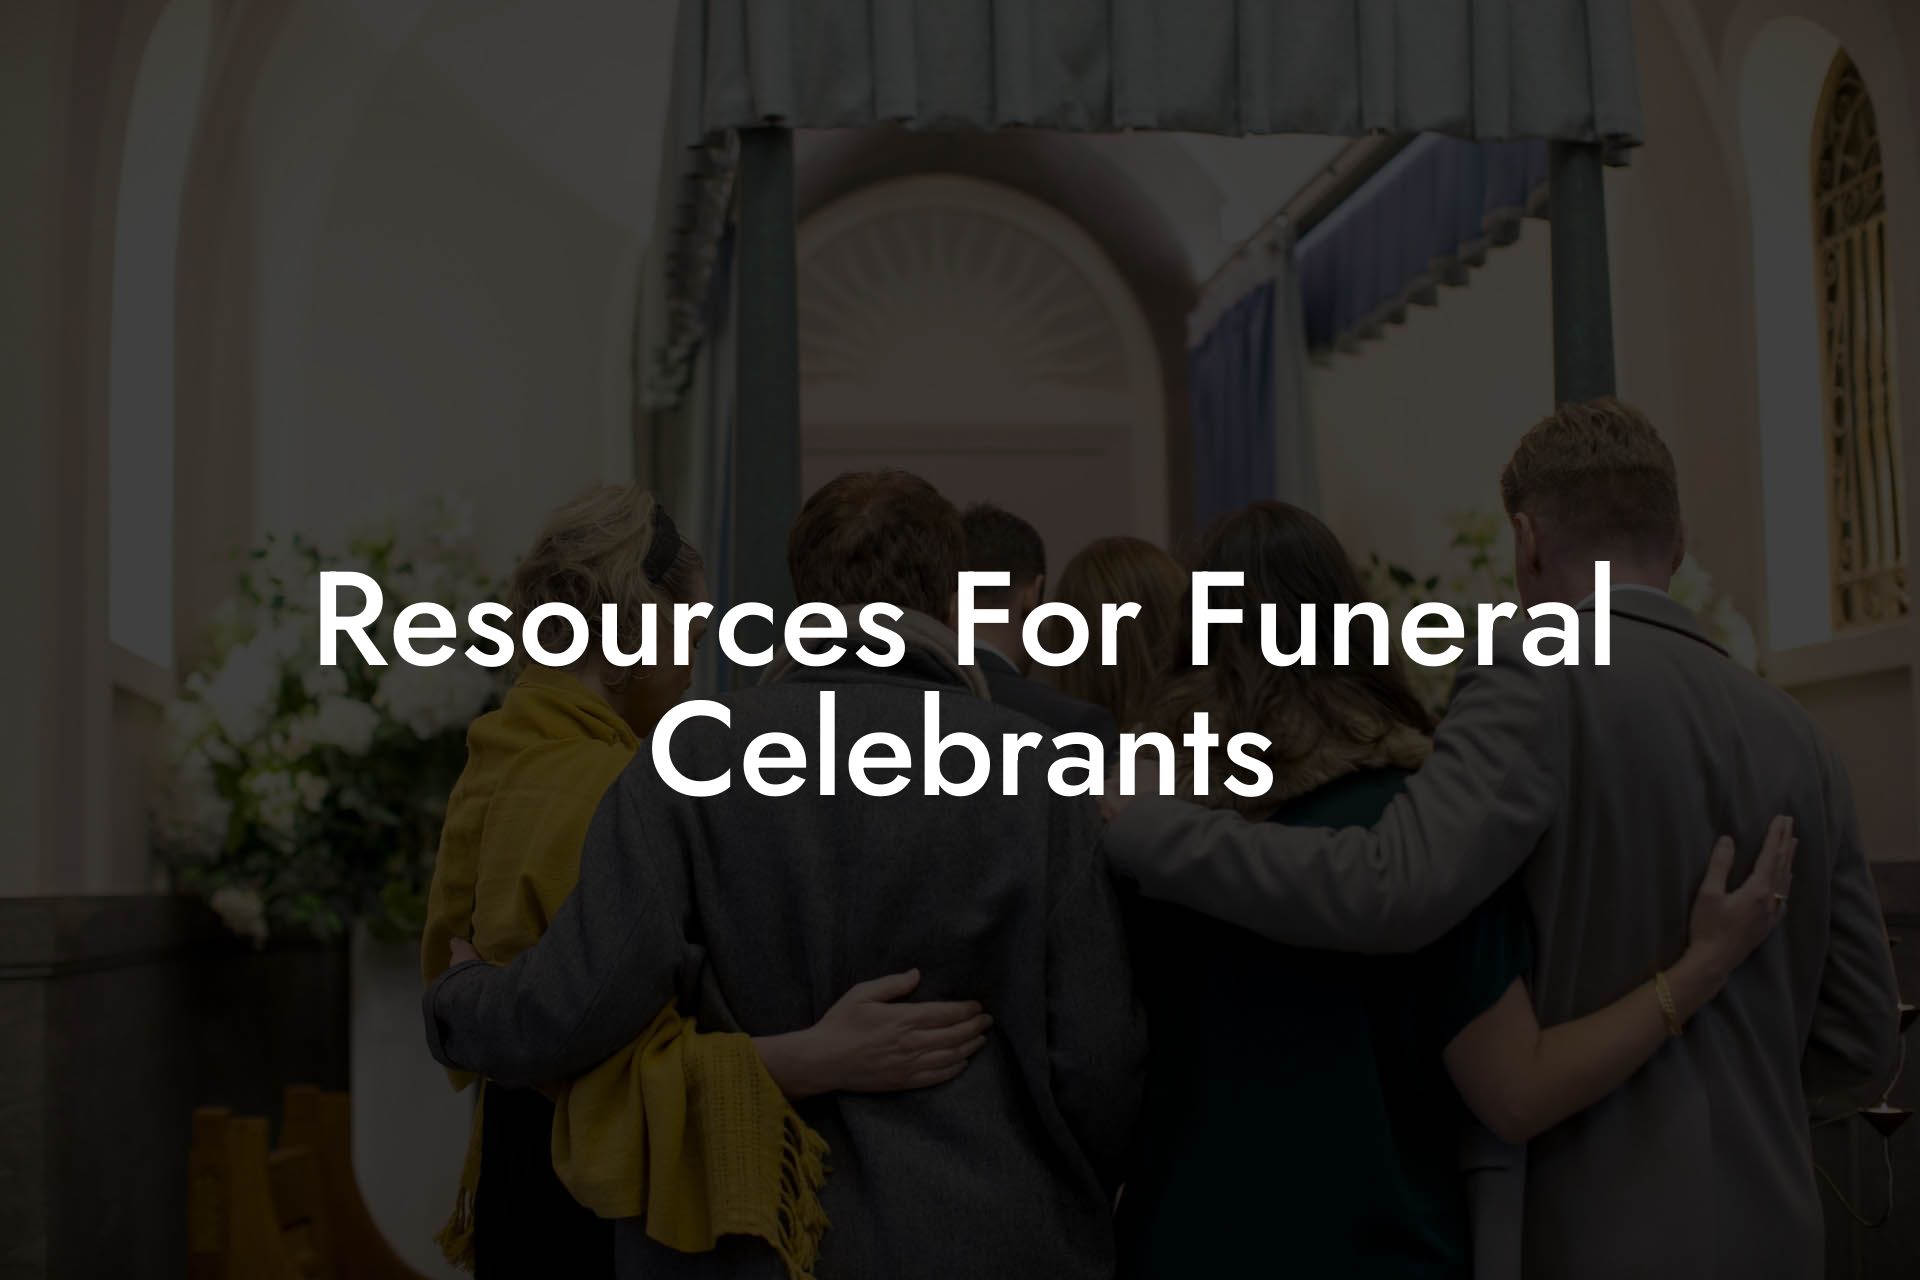 Resources For Funeral Celebrants